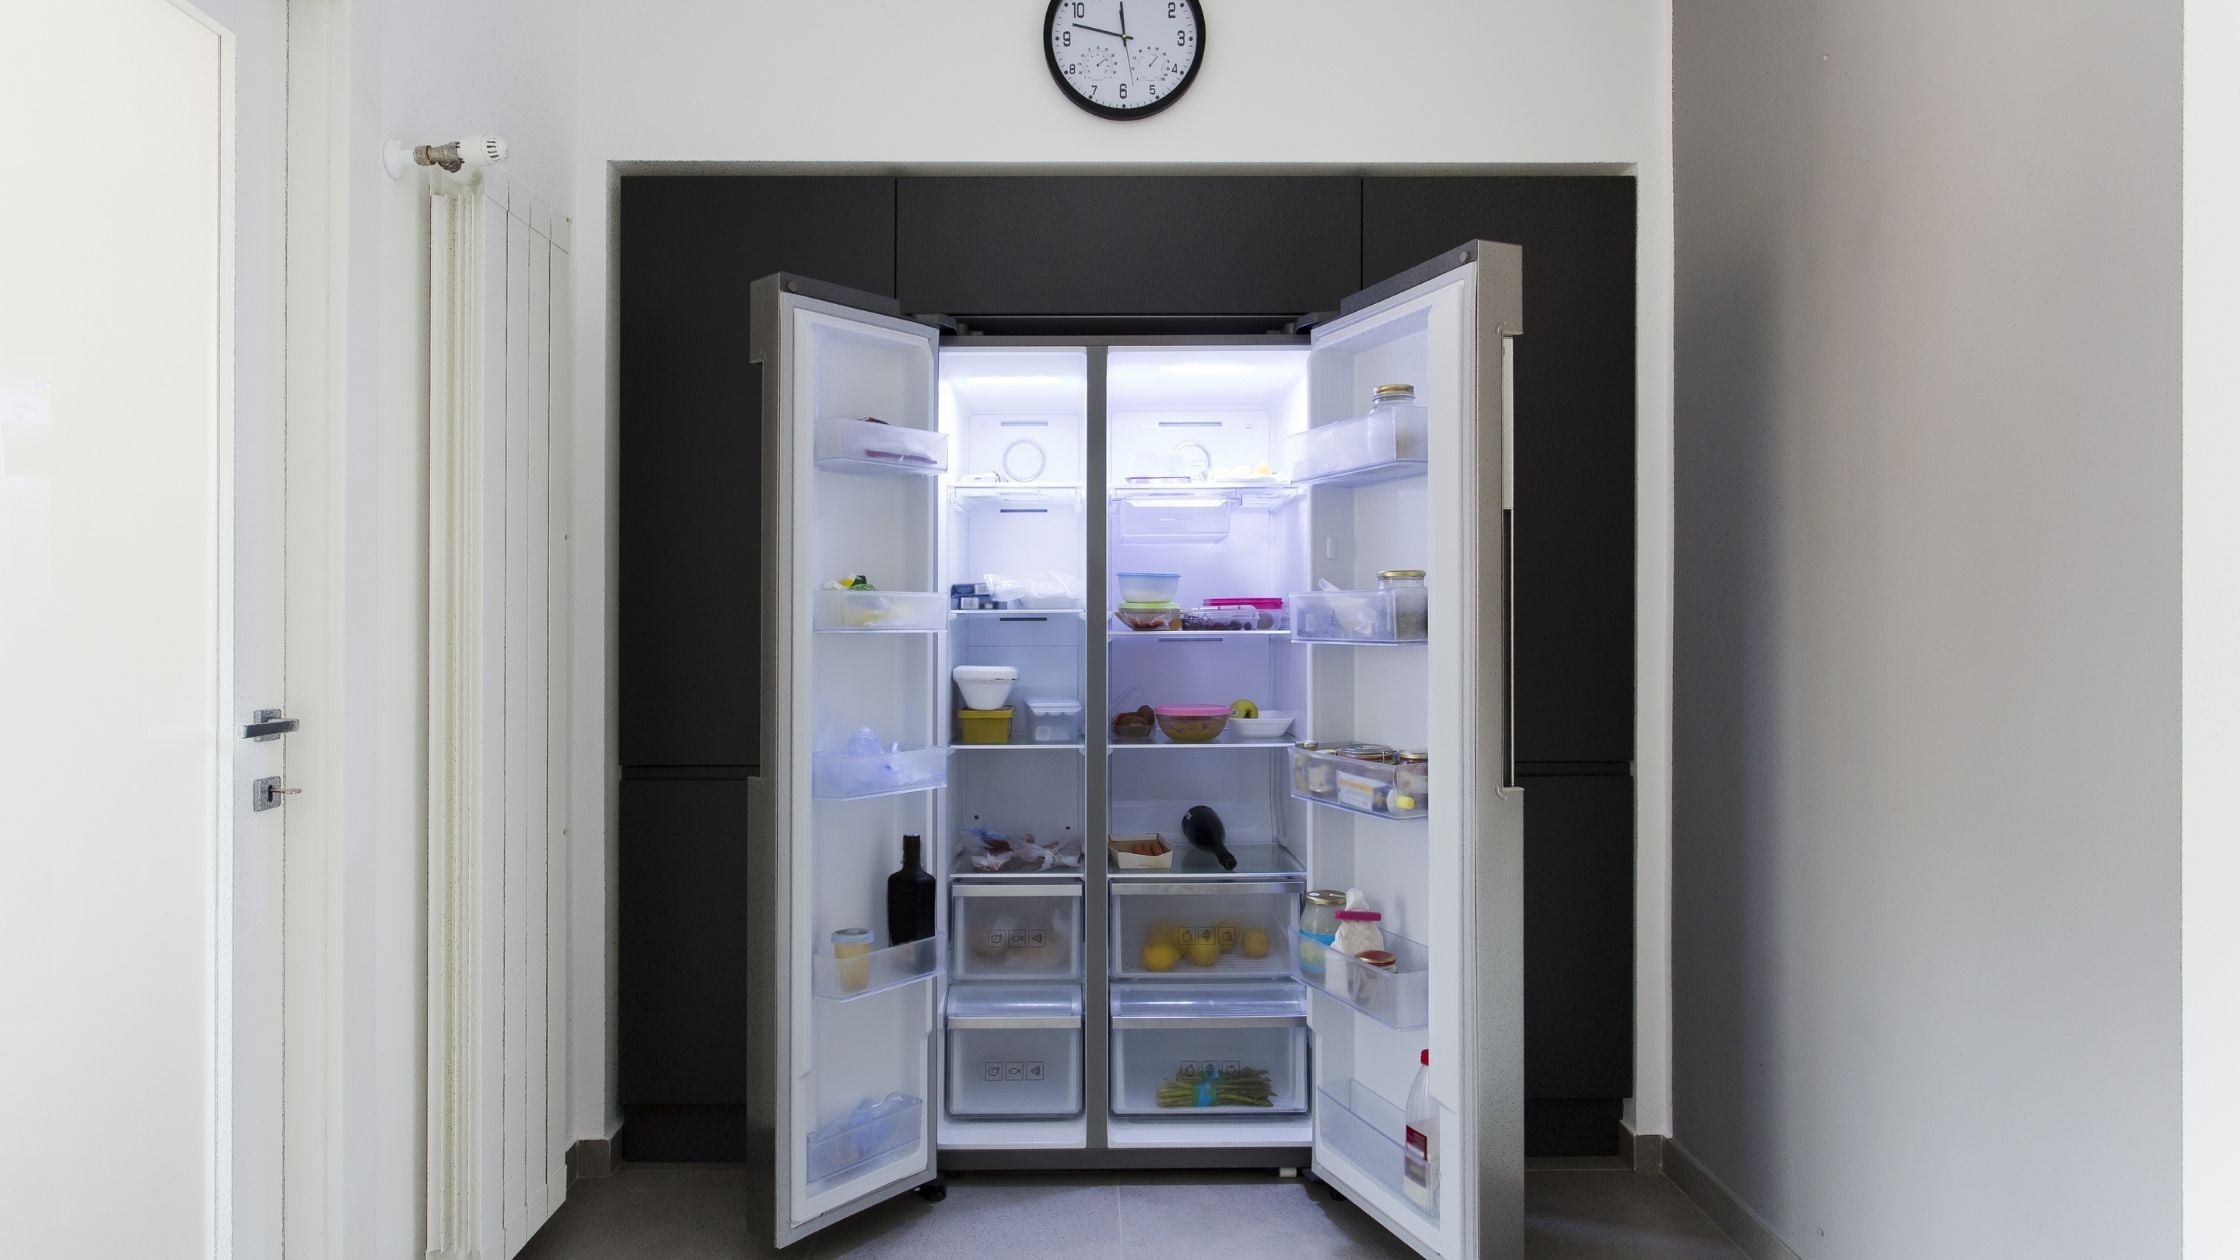 Types of Refrigerators:  side by side refrigerator